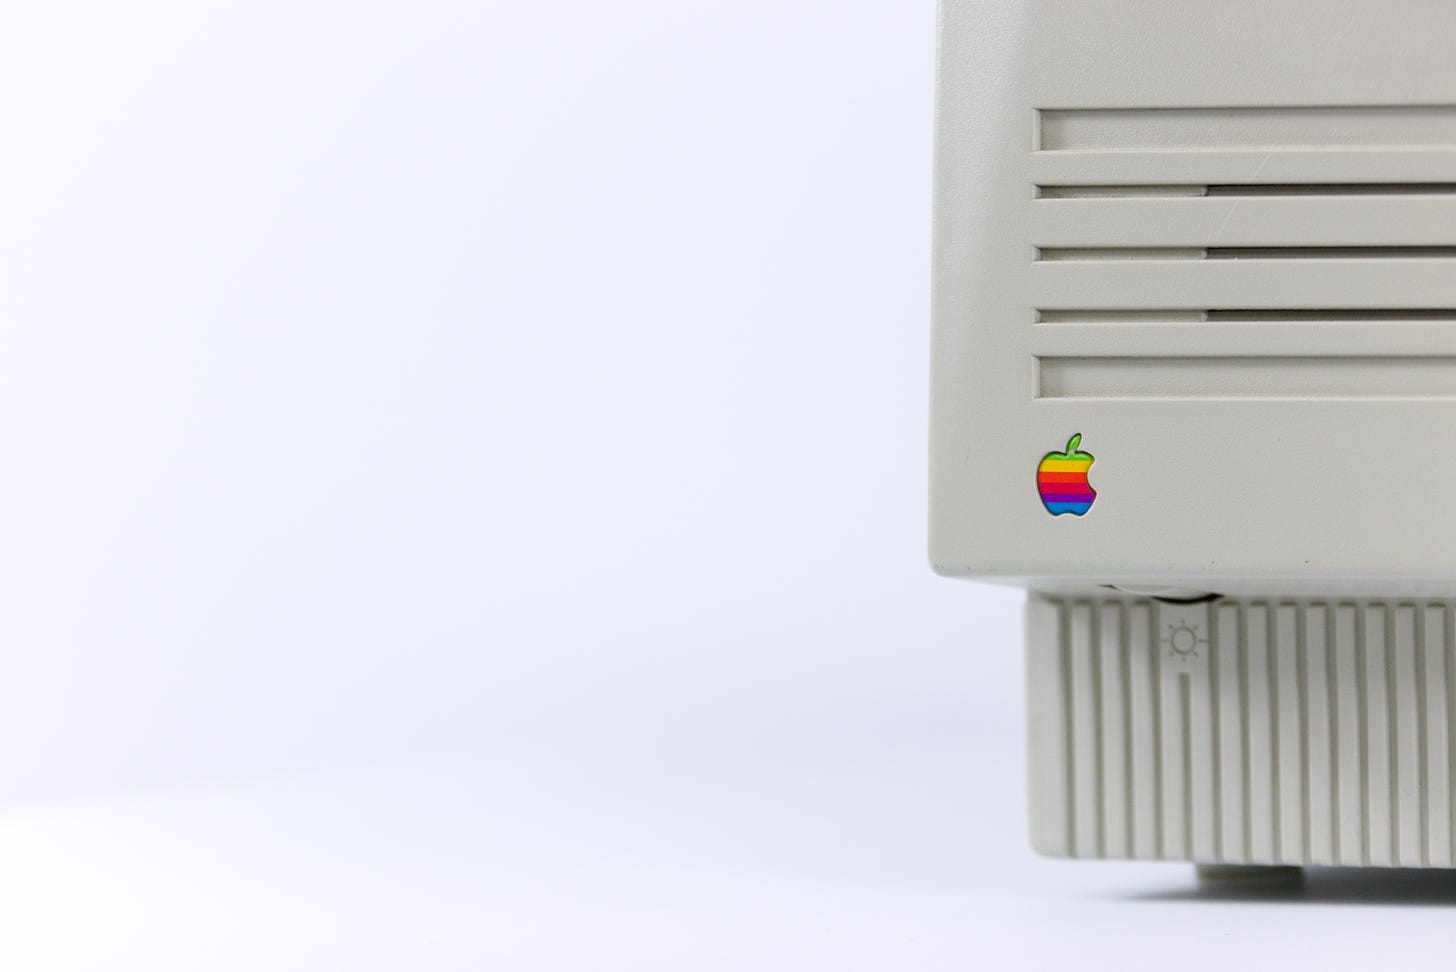 A photo of a vintage Apple computer.